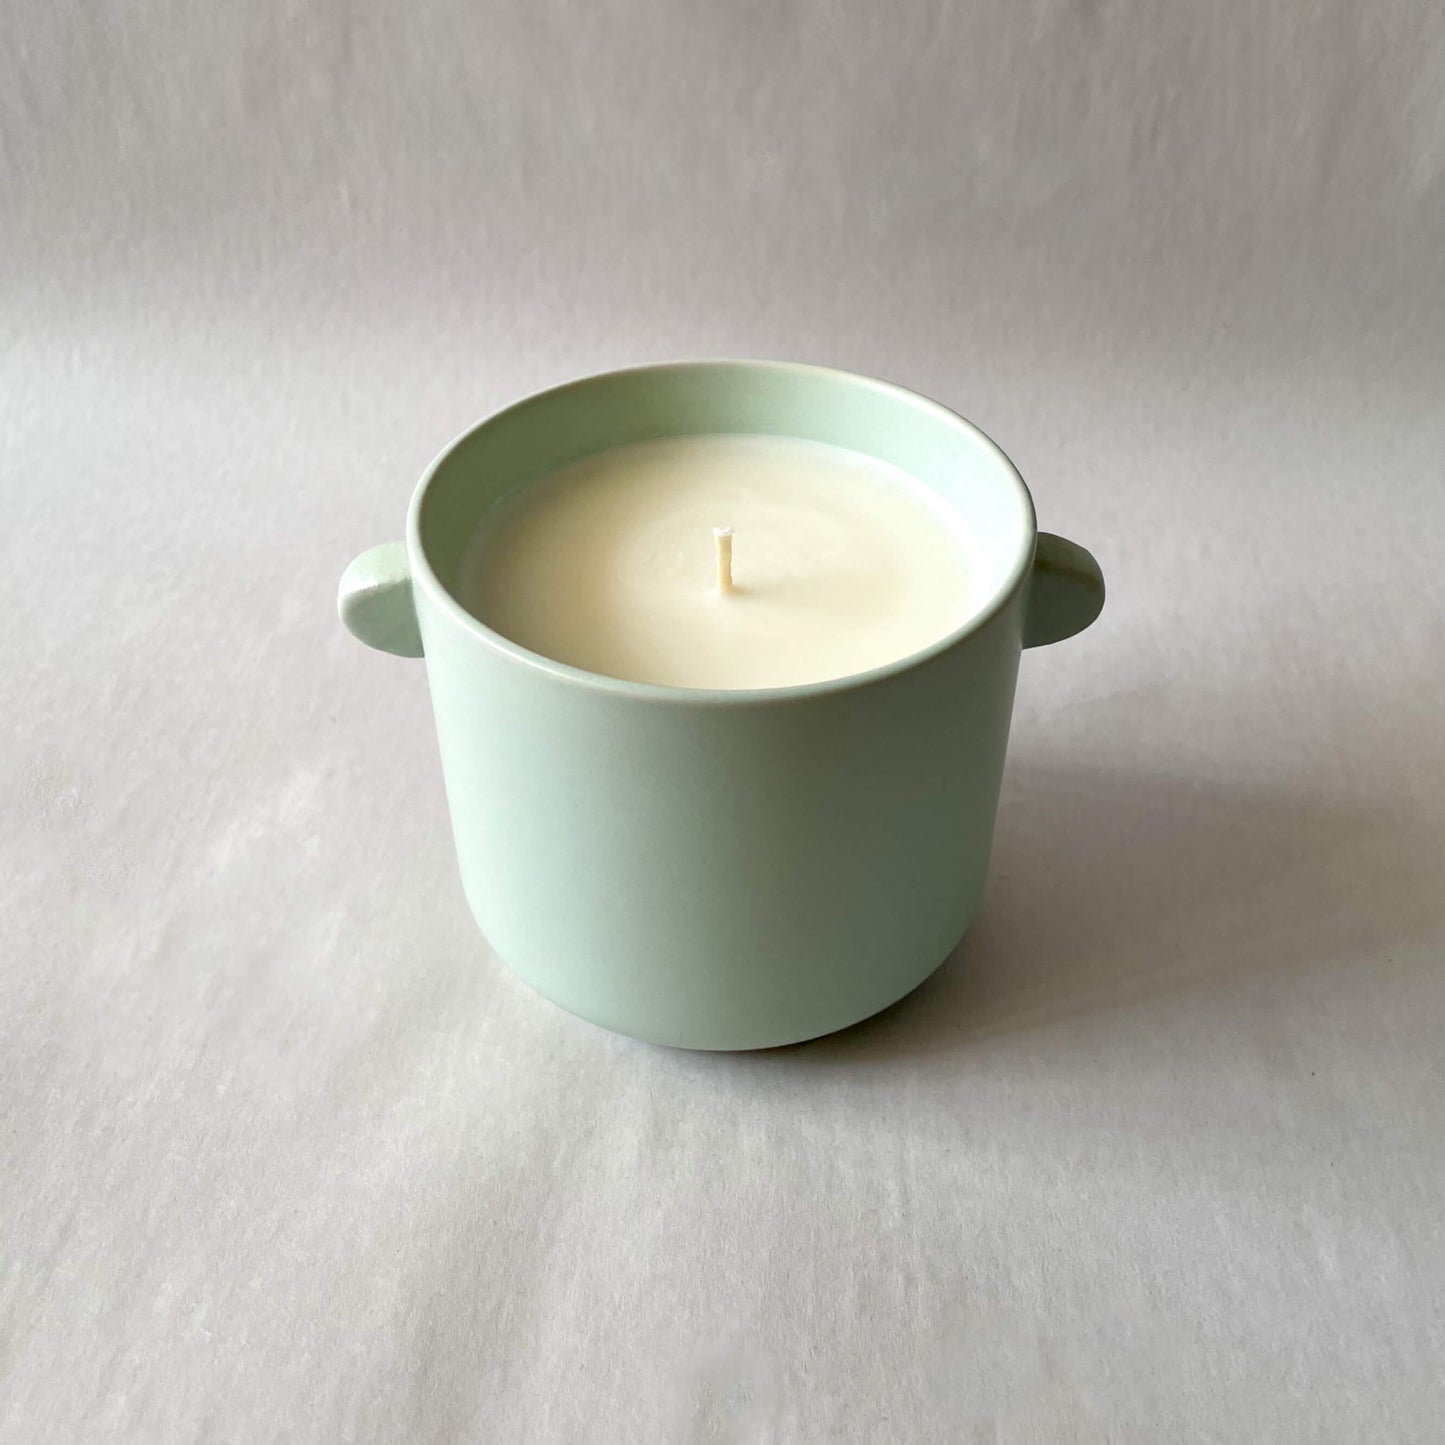 Load image into Gallery viewer, Aromatherapy Scented Pure Soy Clean Burning Candle in Mint Green Luxurious Ceramic Vessel
